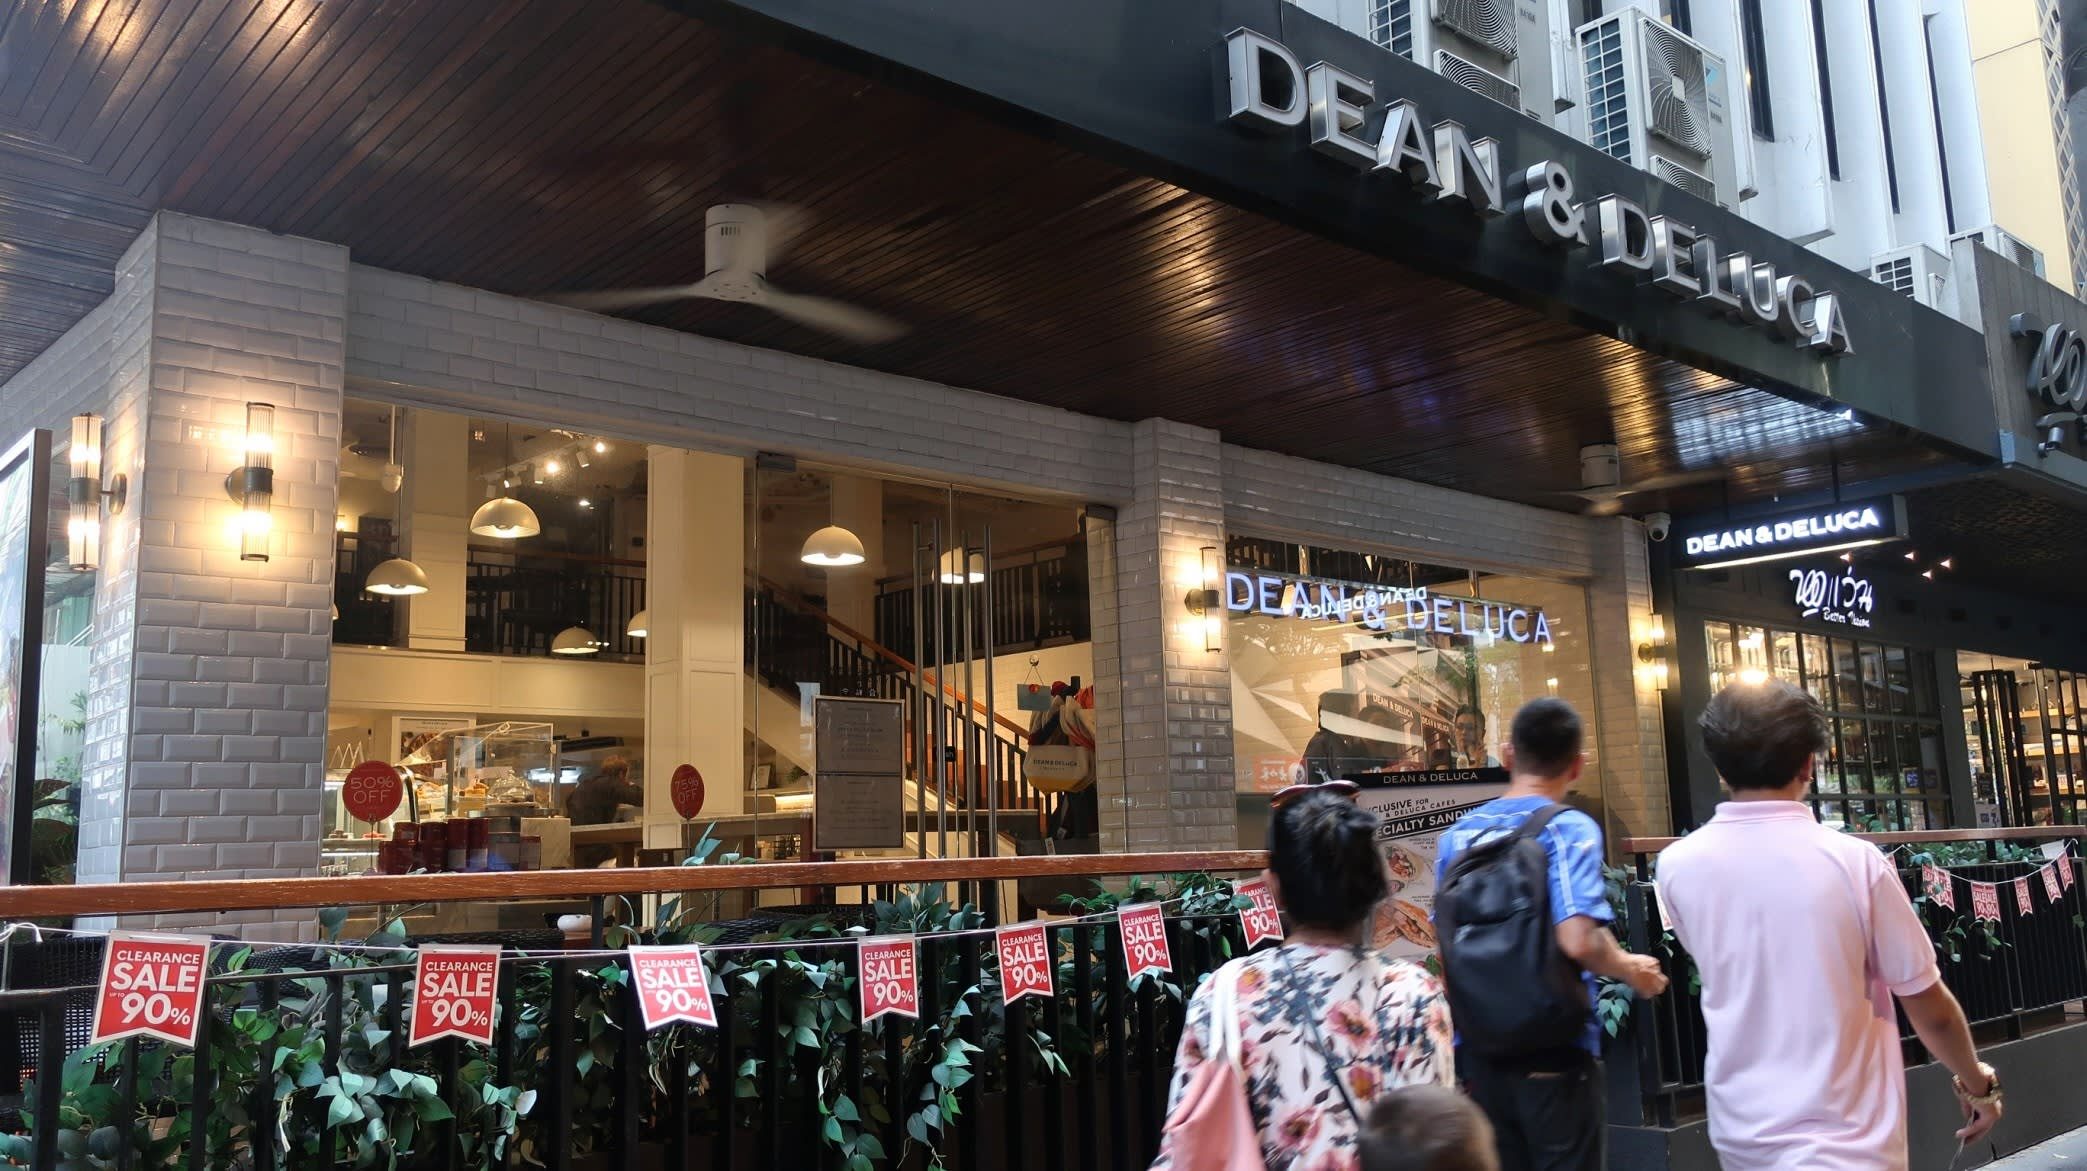 Thai lender Siam Commercial Bank takes 26% in US upscale grocer Dean & DeLuca